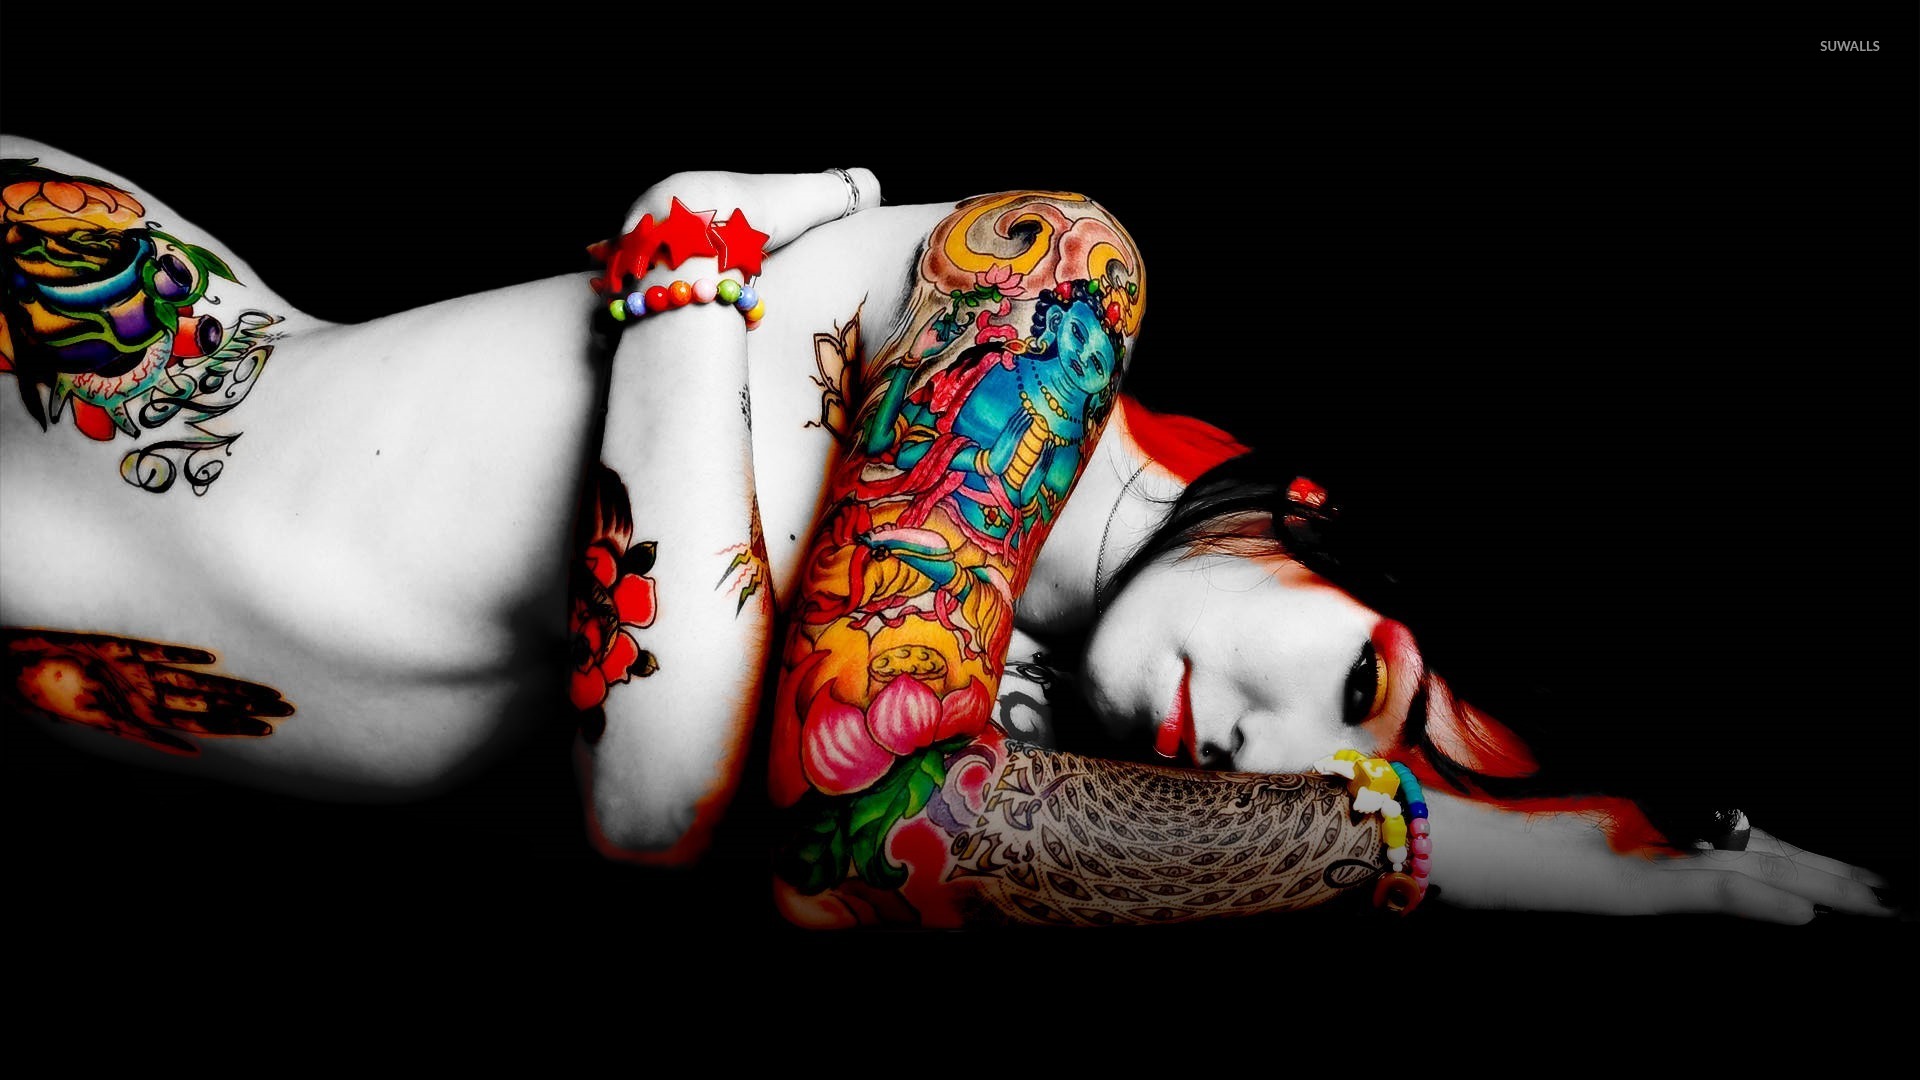 Woman with colorful tattoos  wallpaper  Artistic 